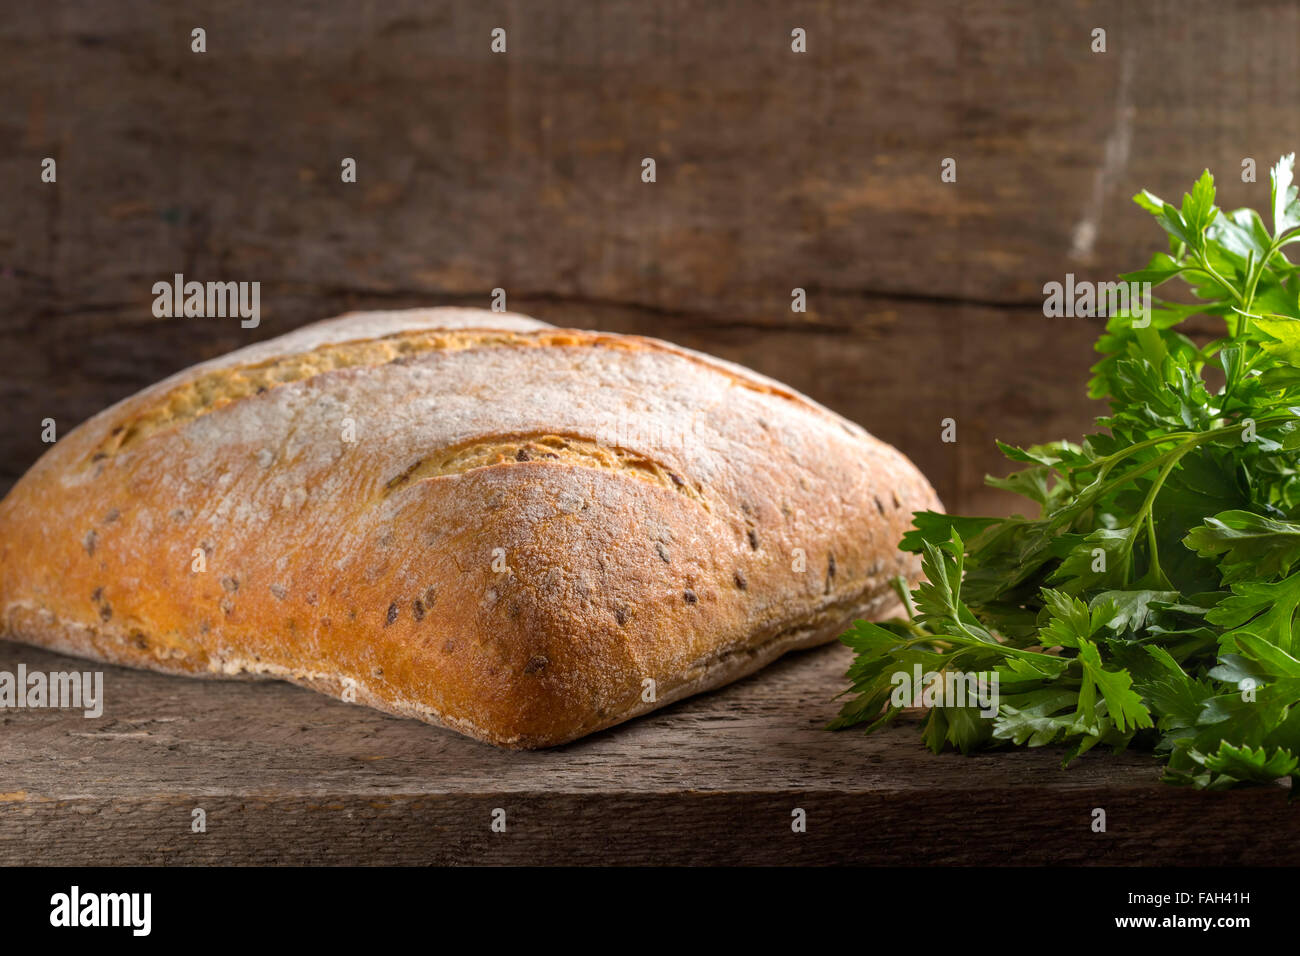 Homemade fresh baked bread loaf and parsley bunch over rustic wooden background Stock Photo